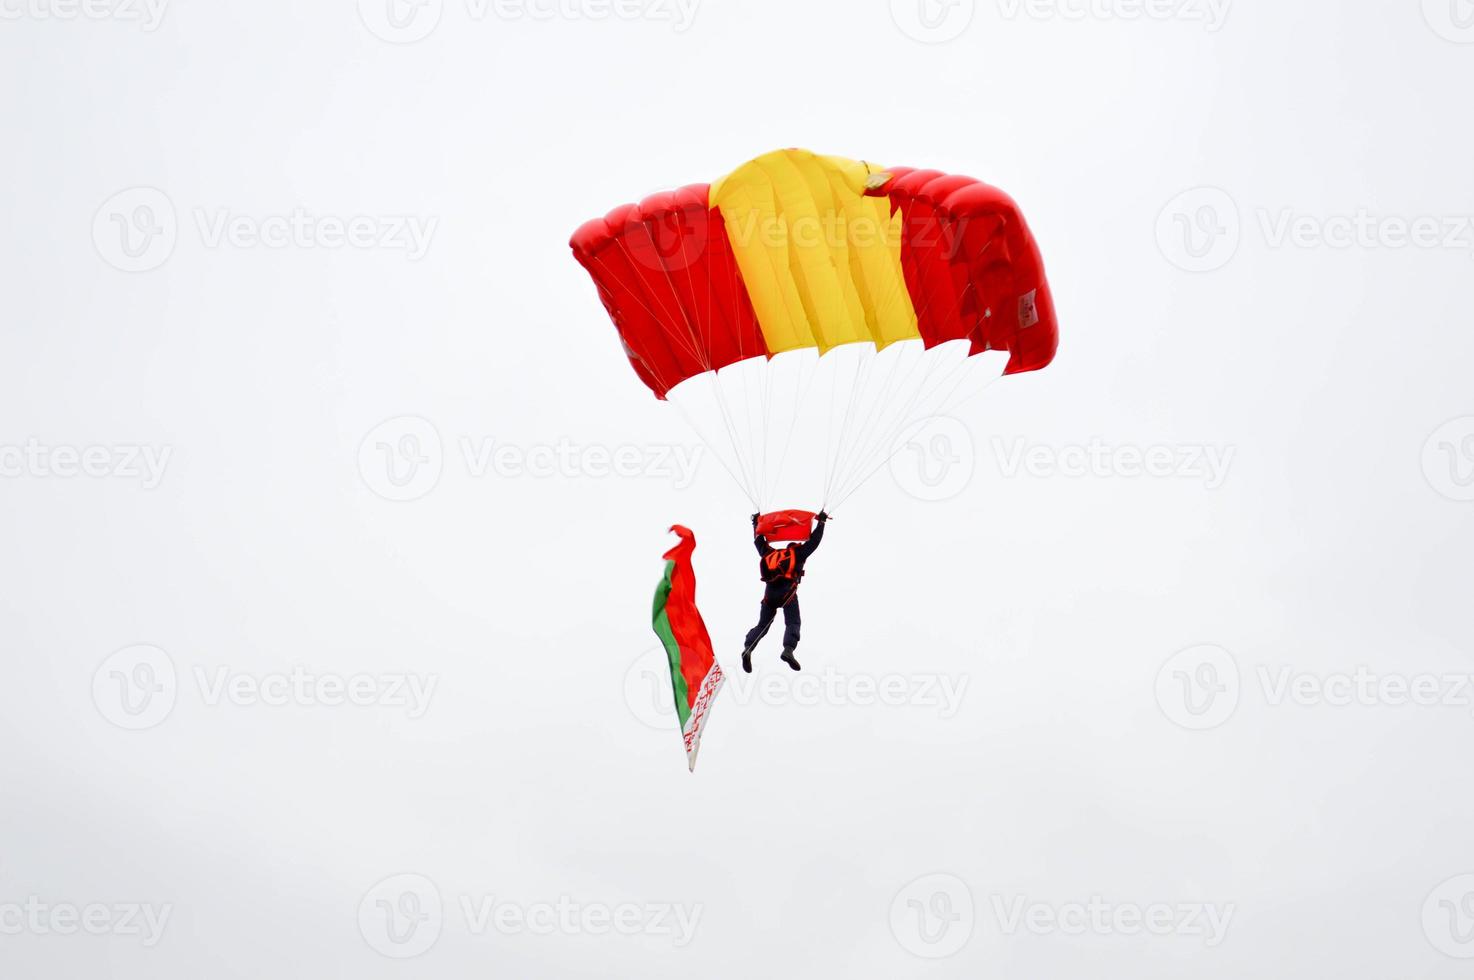 A parachutist with a bright multicolored parachute flies across the sky with the flag of the Republic of Belarus skydiver in the background of the blue sky photo